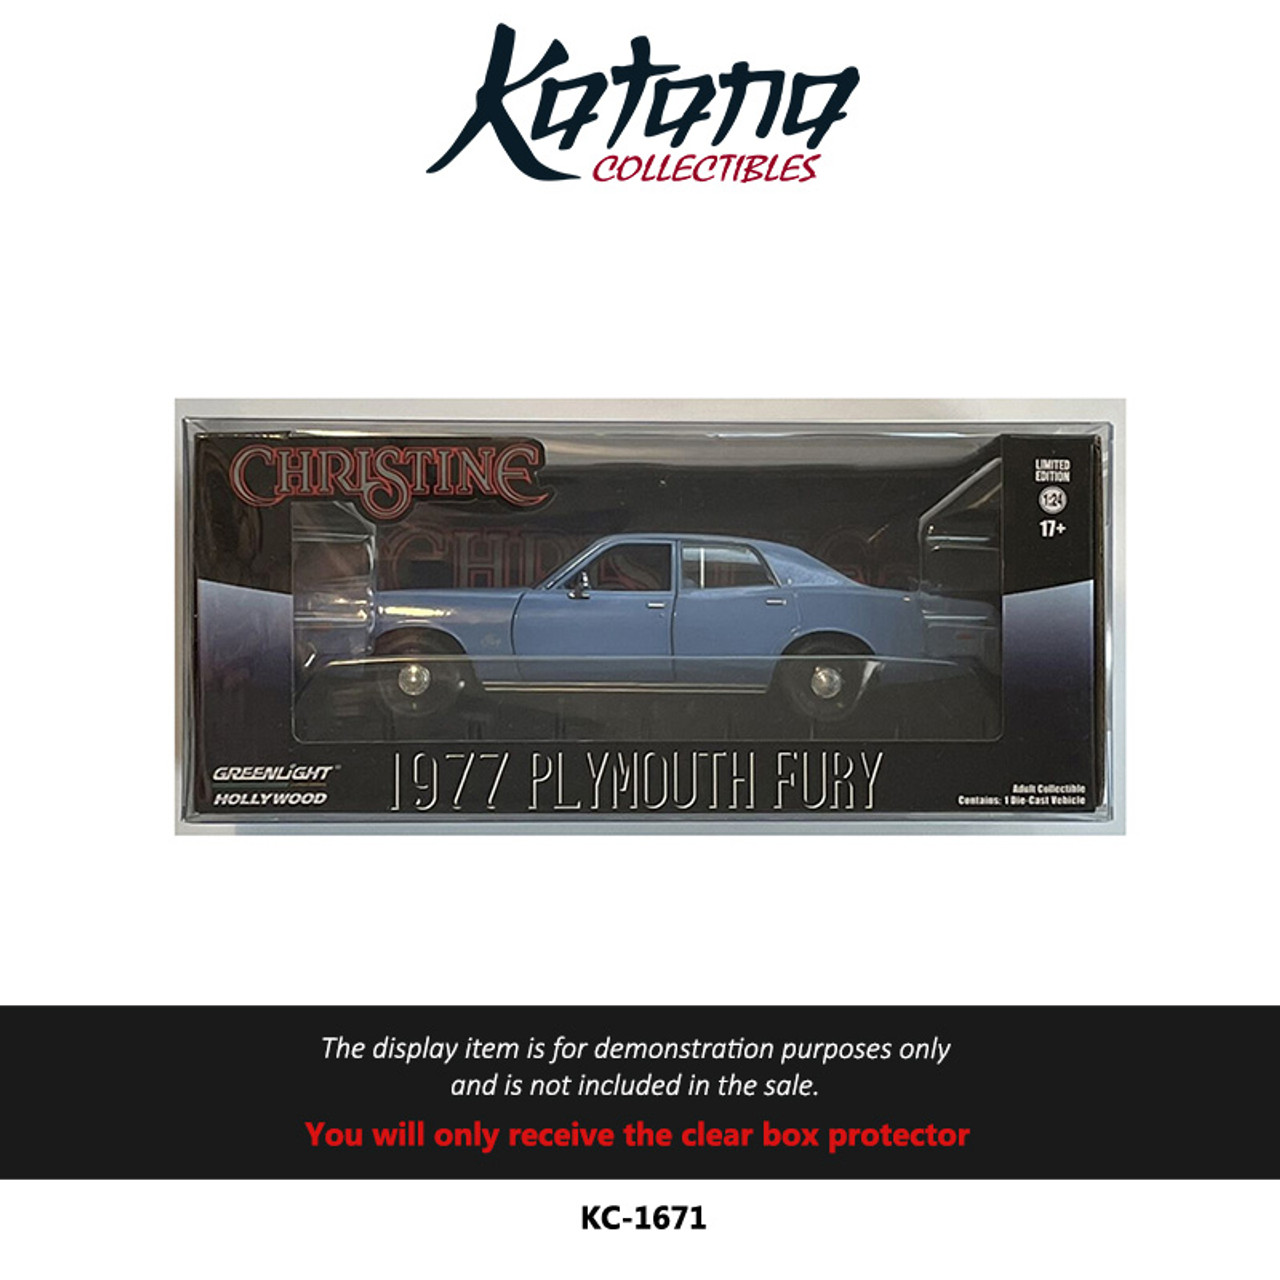 Katana Collectibles Protector For Greenlight Hollywood Christine 1977 Plymouth Fury